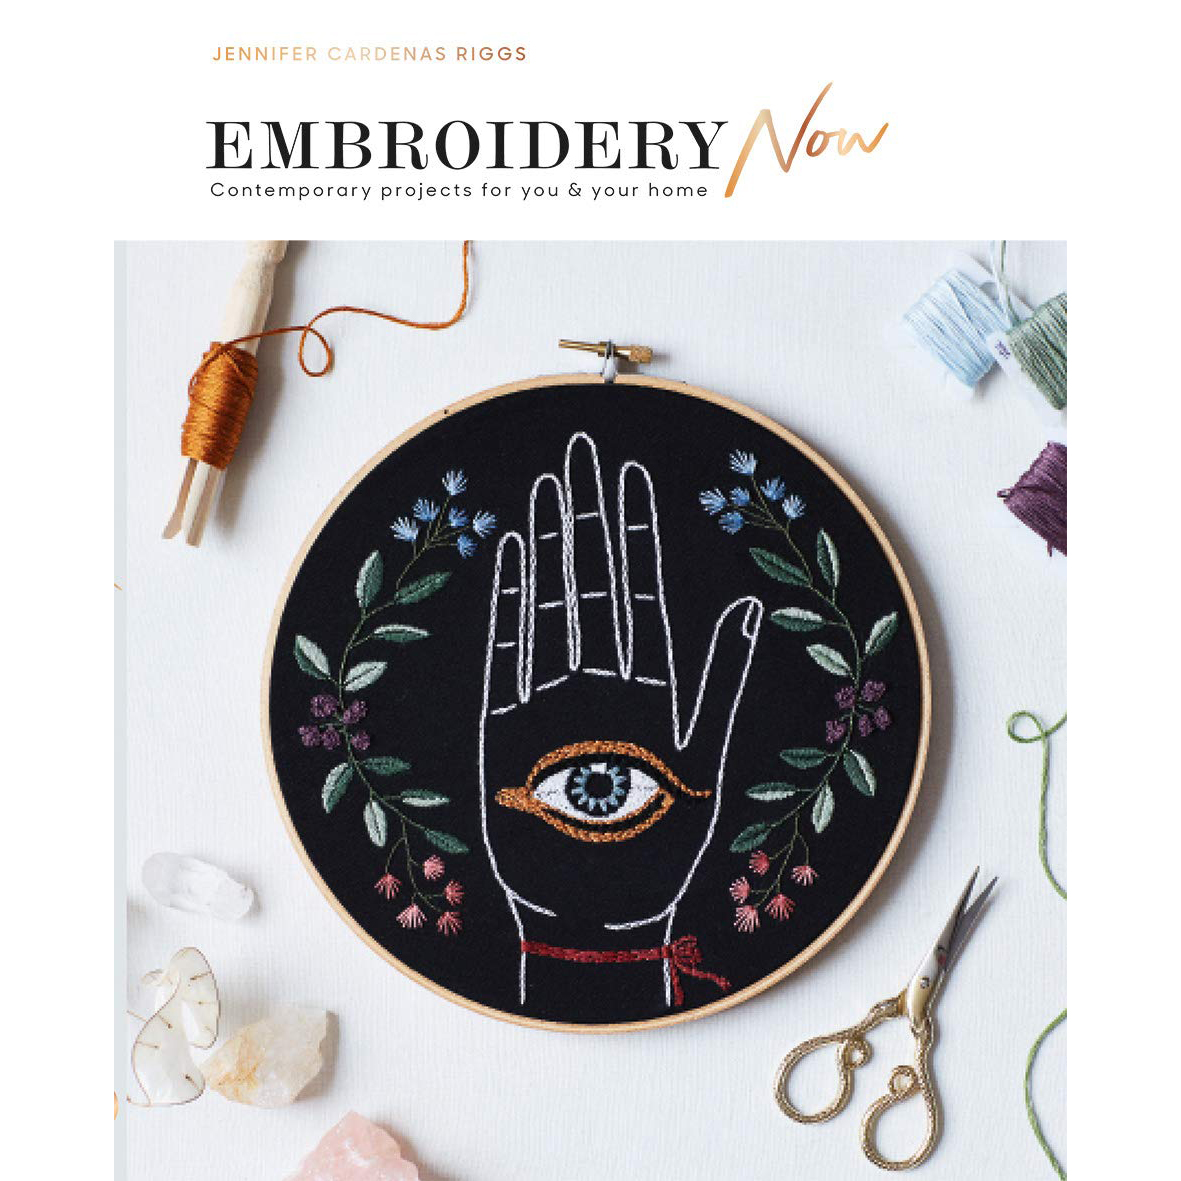 Embroidery Now:Contemporary projects for you and your home